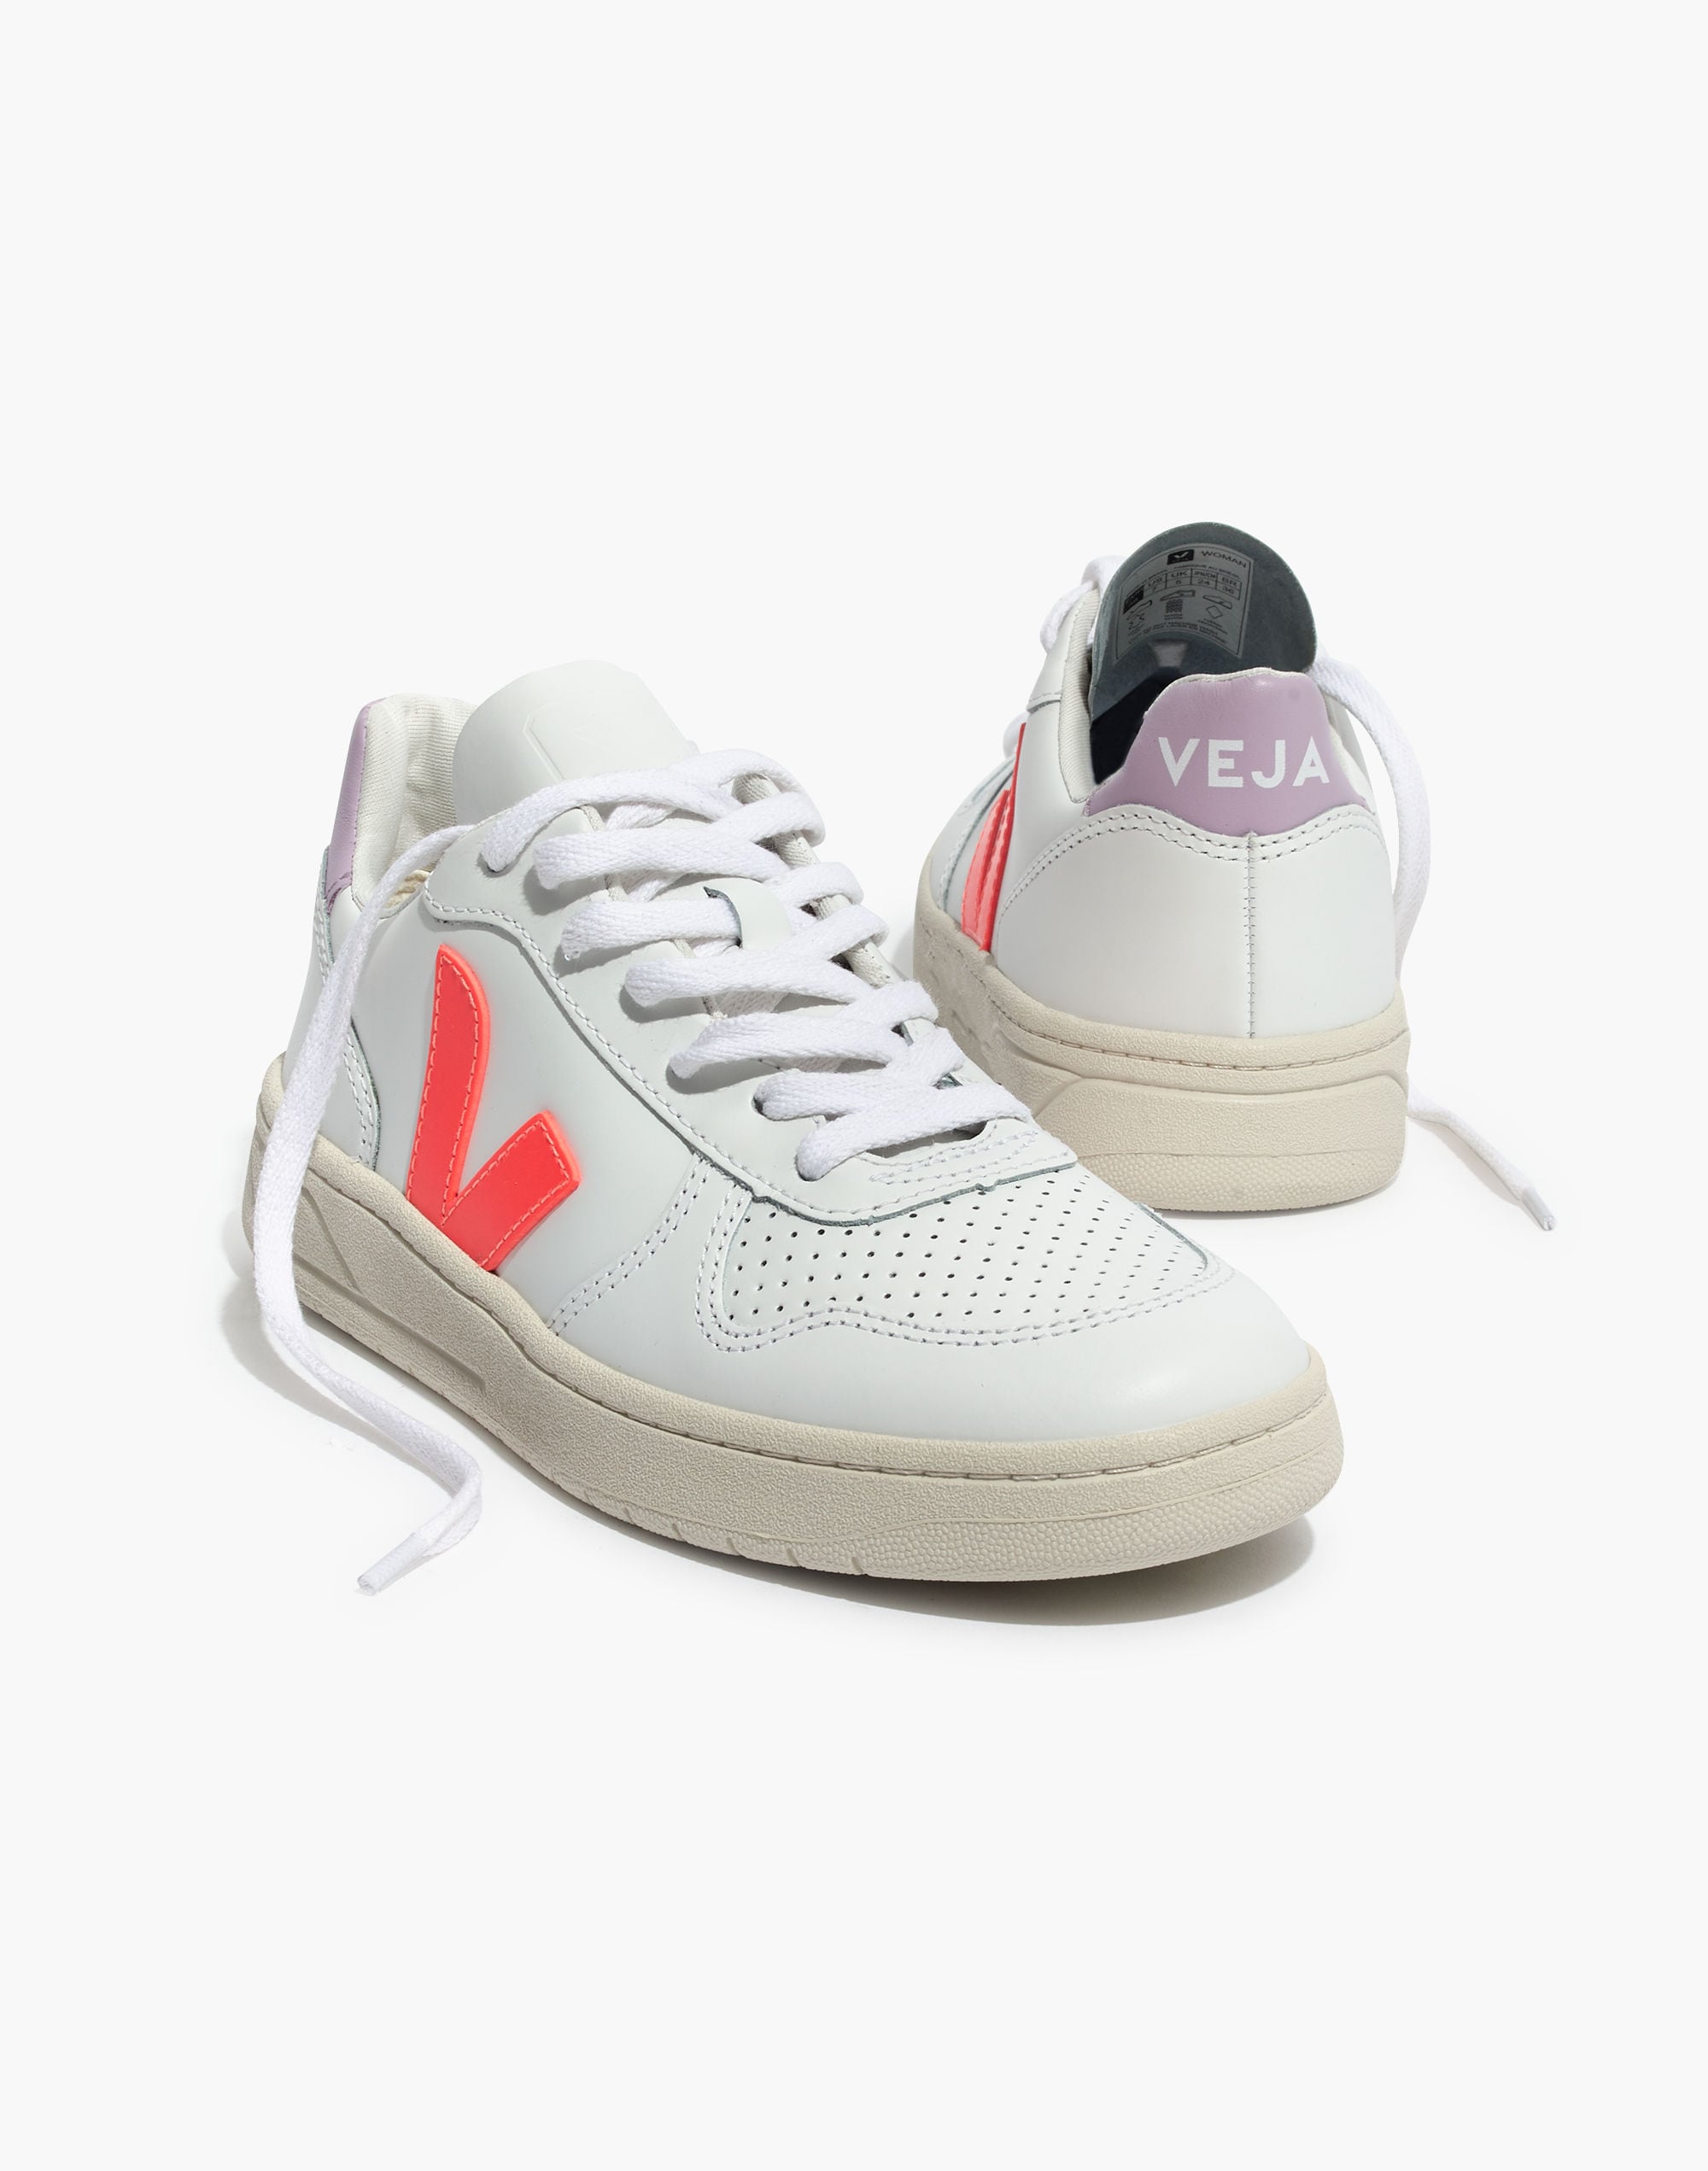 Madewell x Veja™ V-10 Leather Sneakers in Lilac and Neon Orange